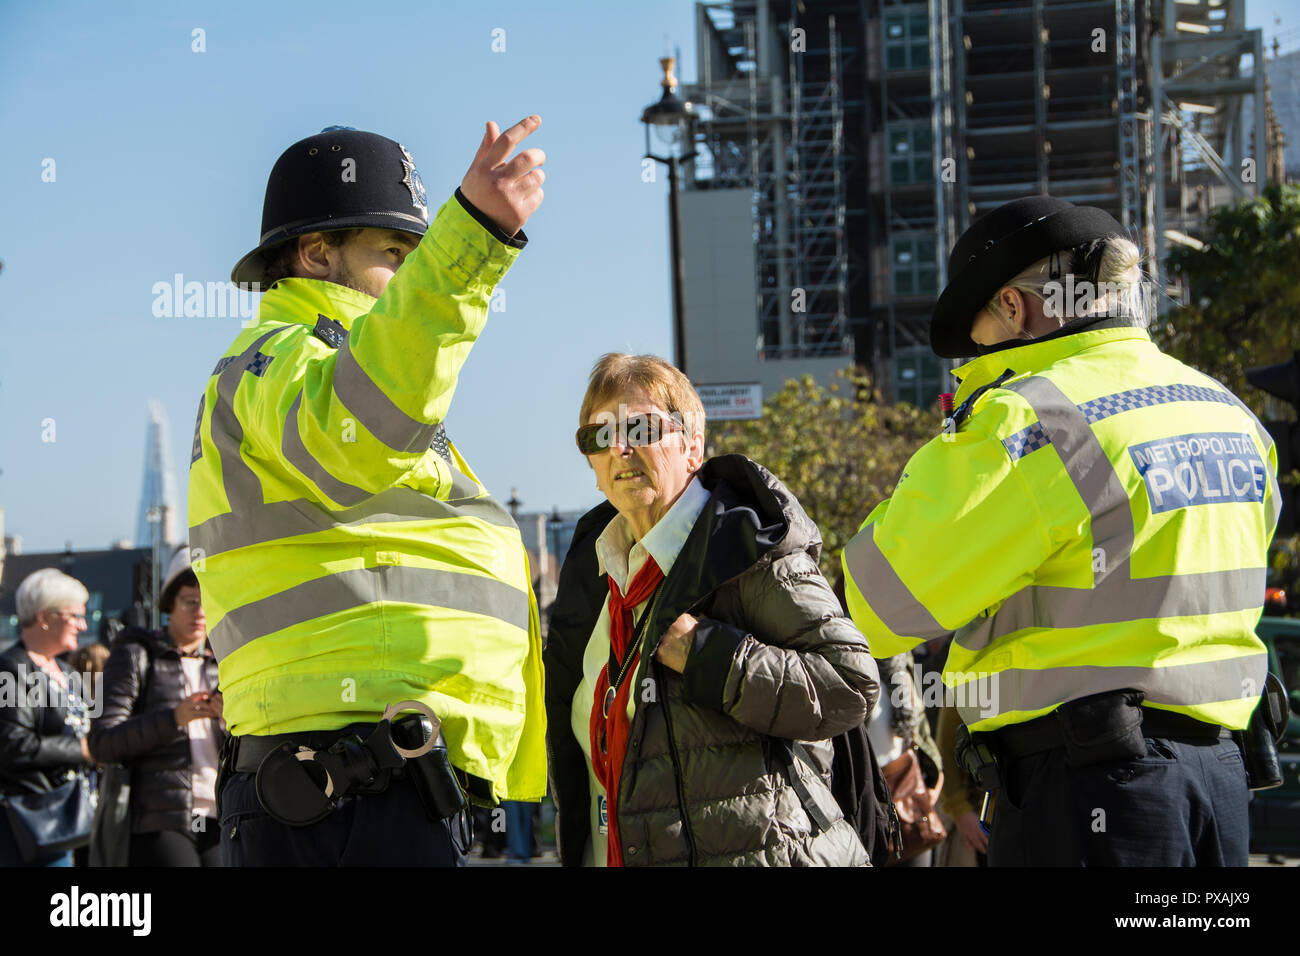 Police (Bobbies) on the beat in Parliament Square, Westminster, London, UK Stock Photo